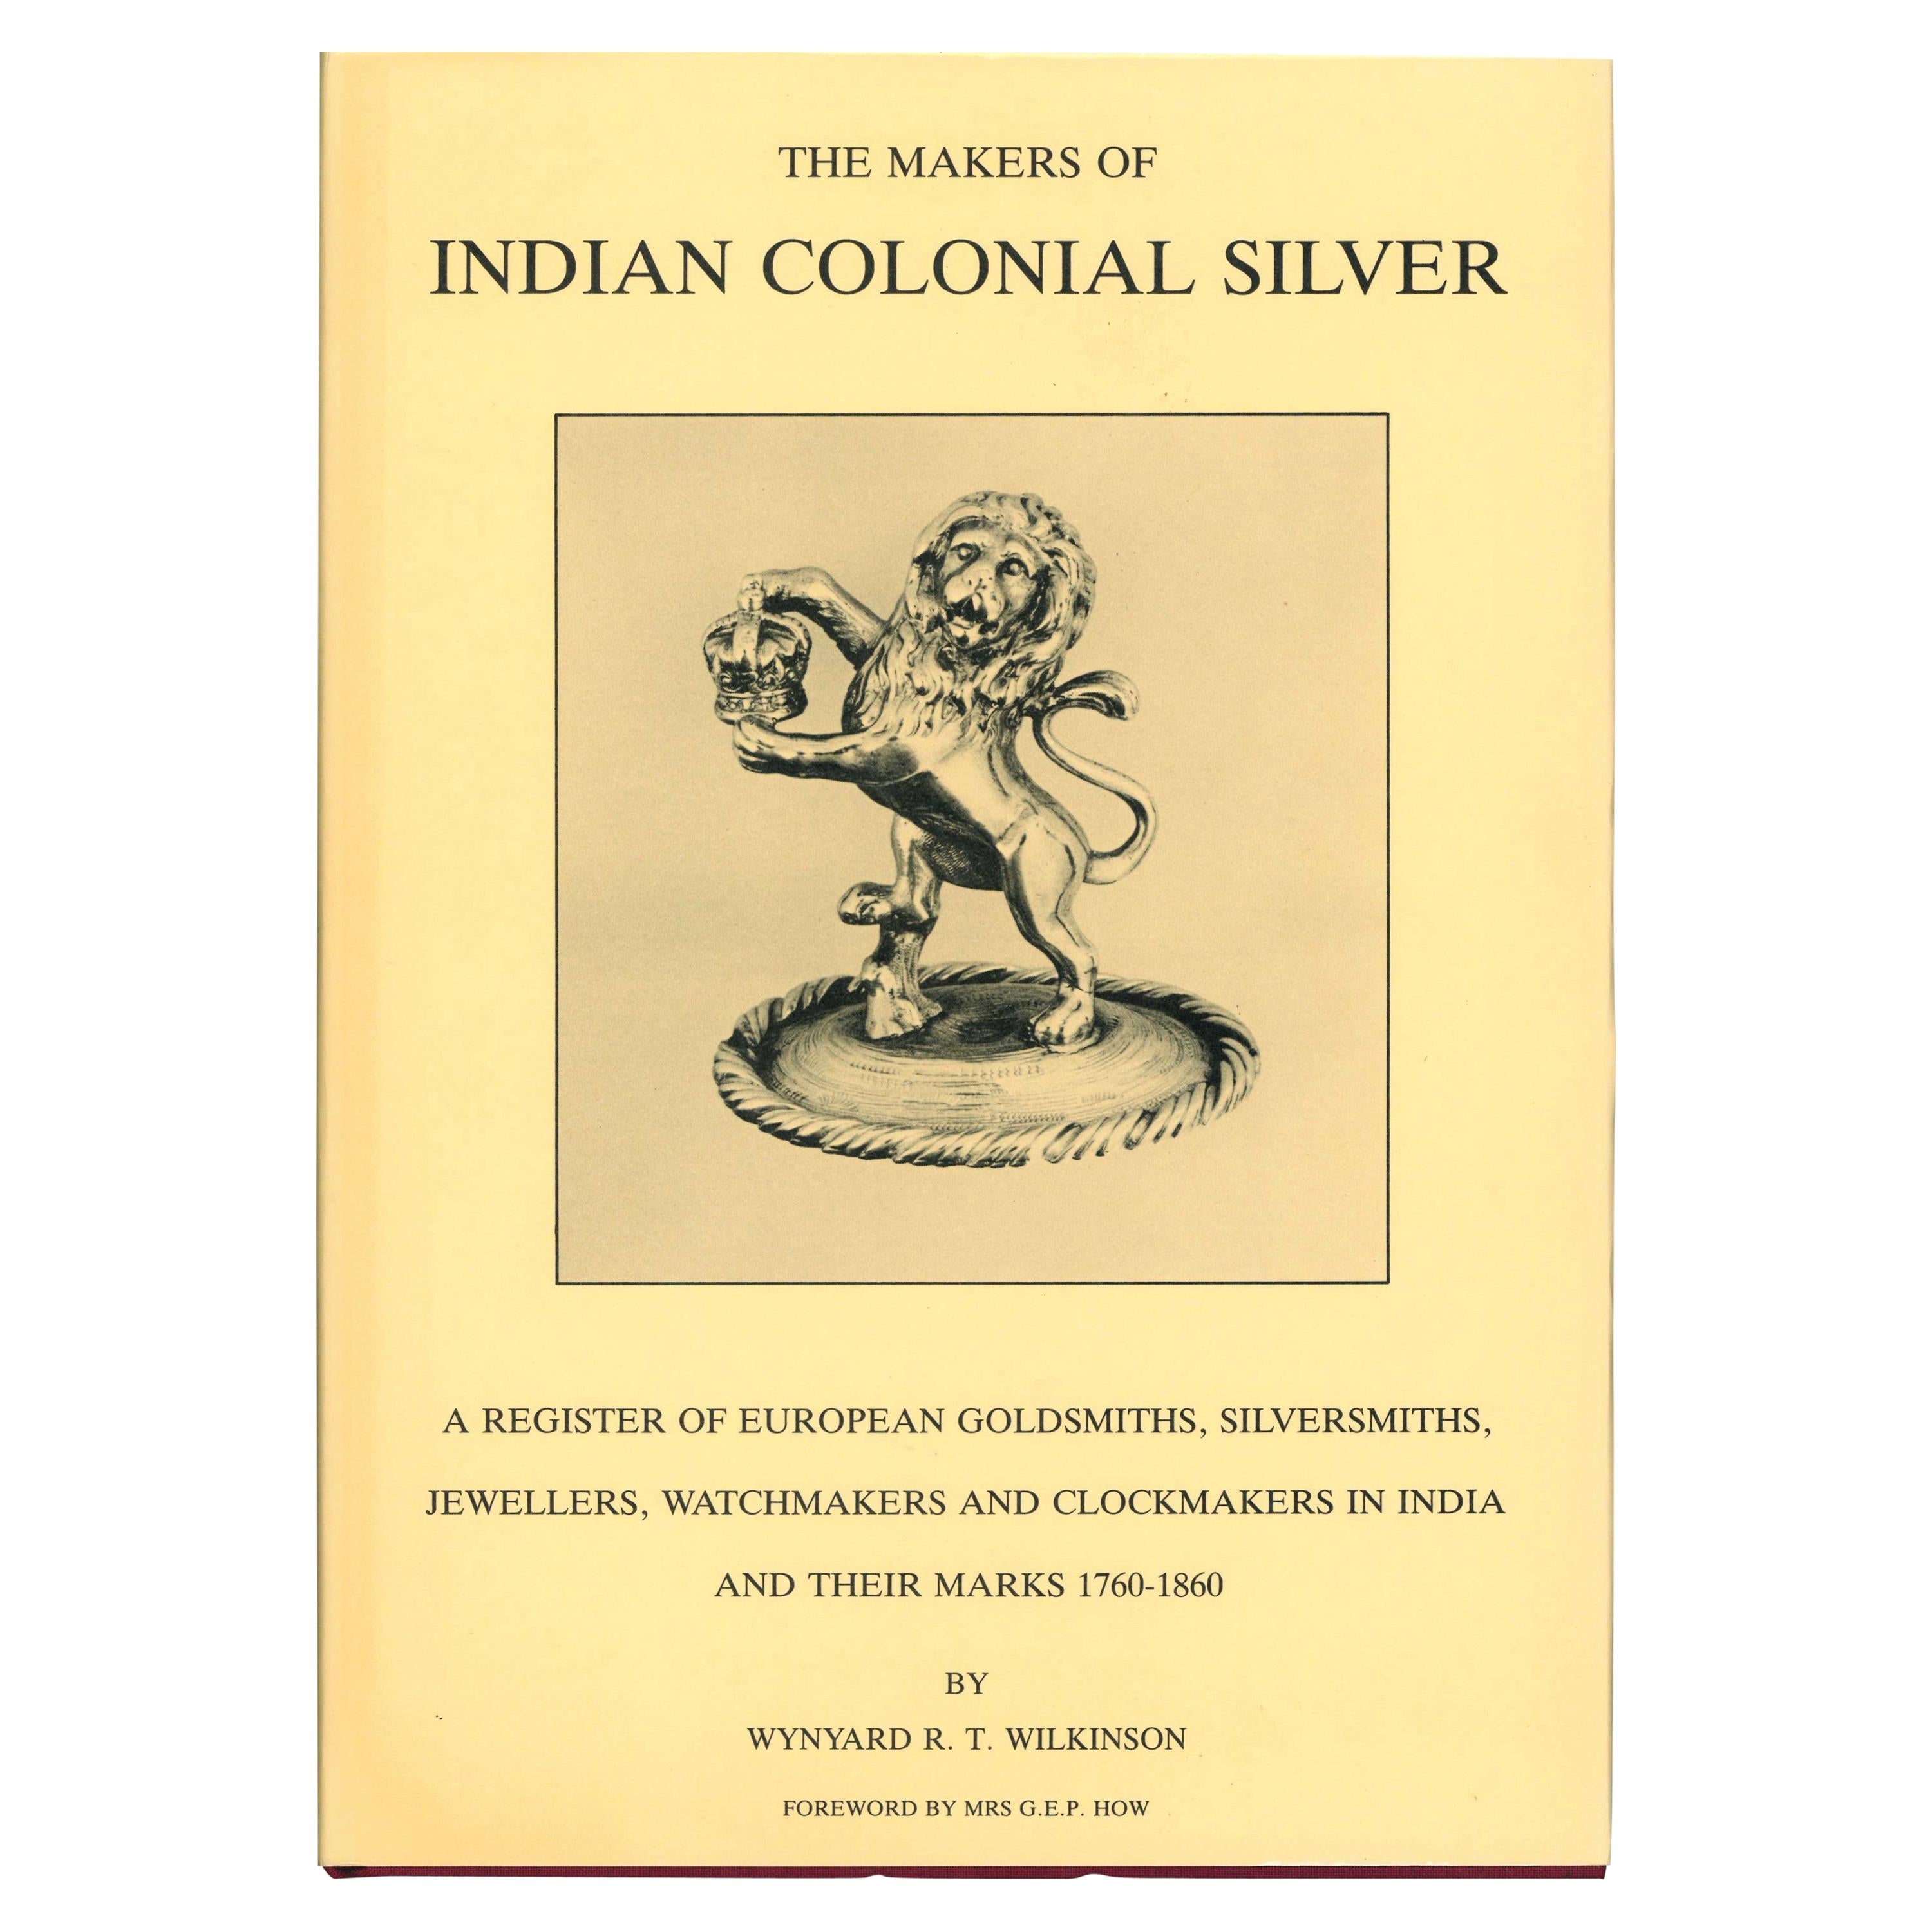 The Makers of Indian Colonial Silber von Wynyard R. T. Wilkinson (Buch)